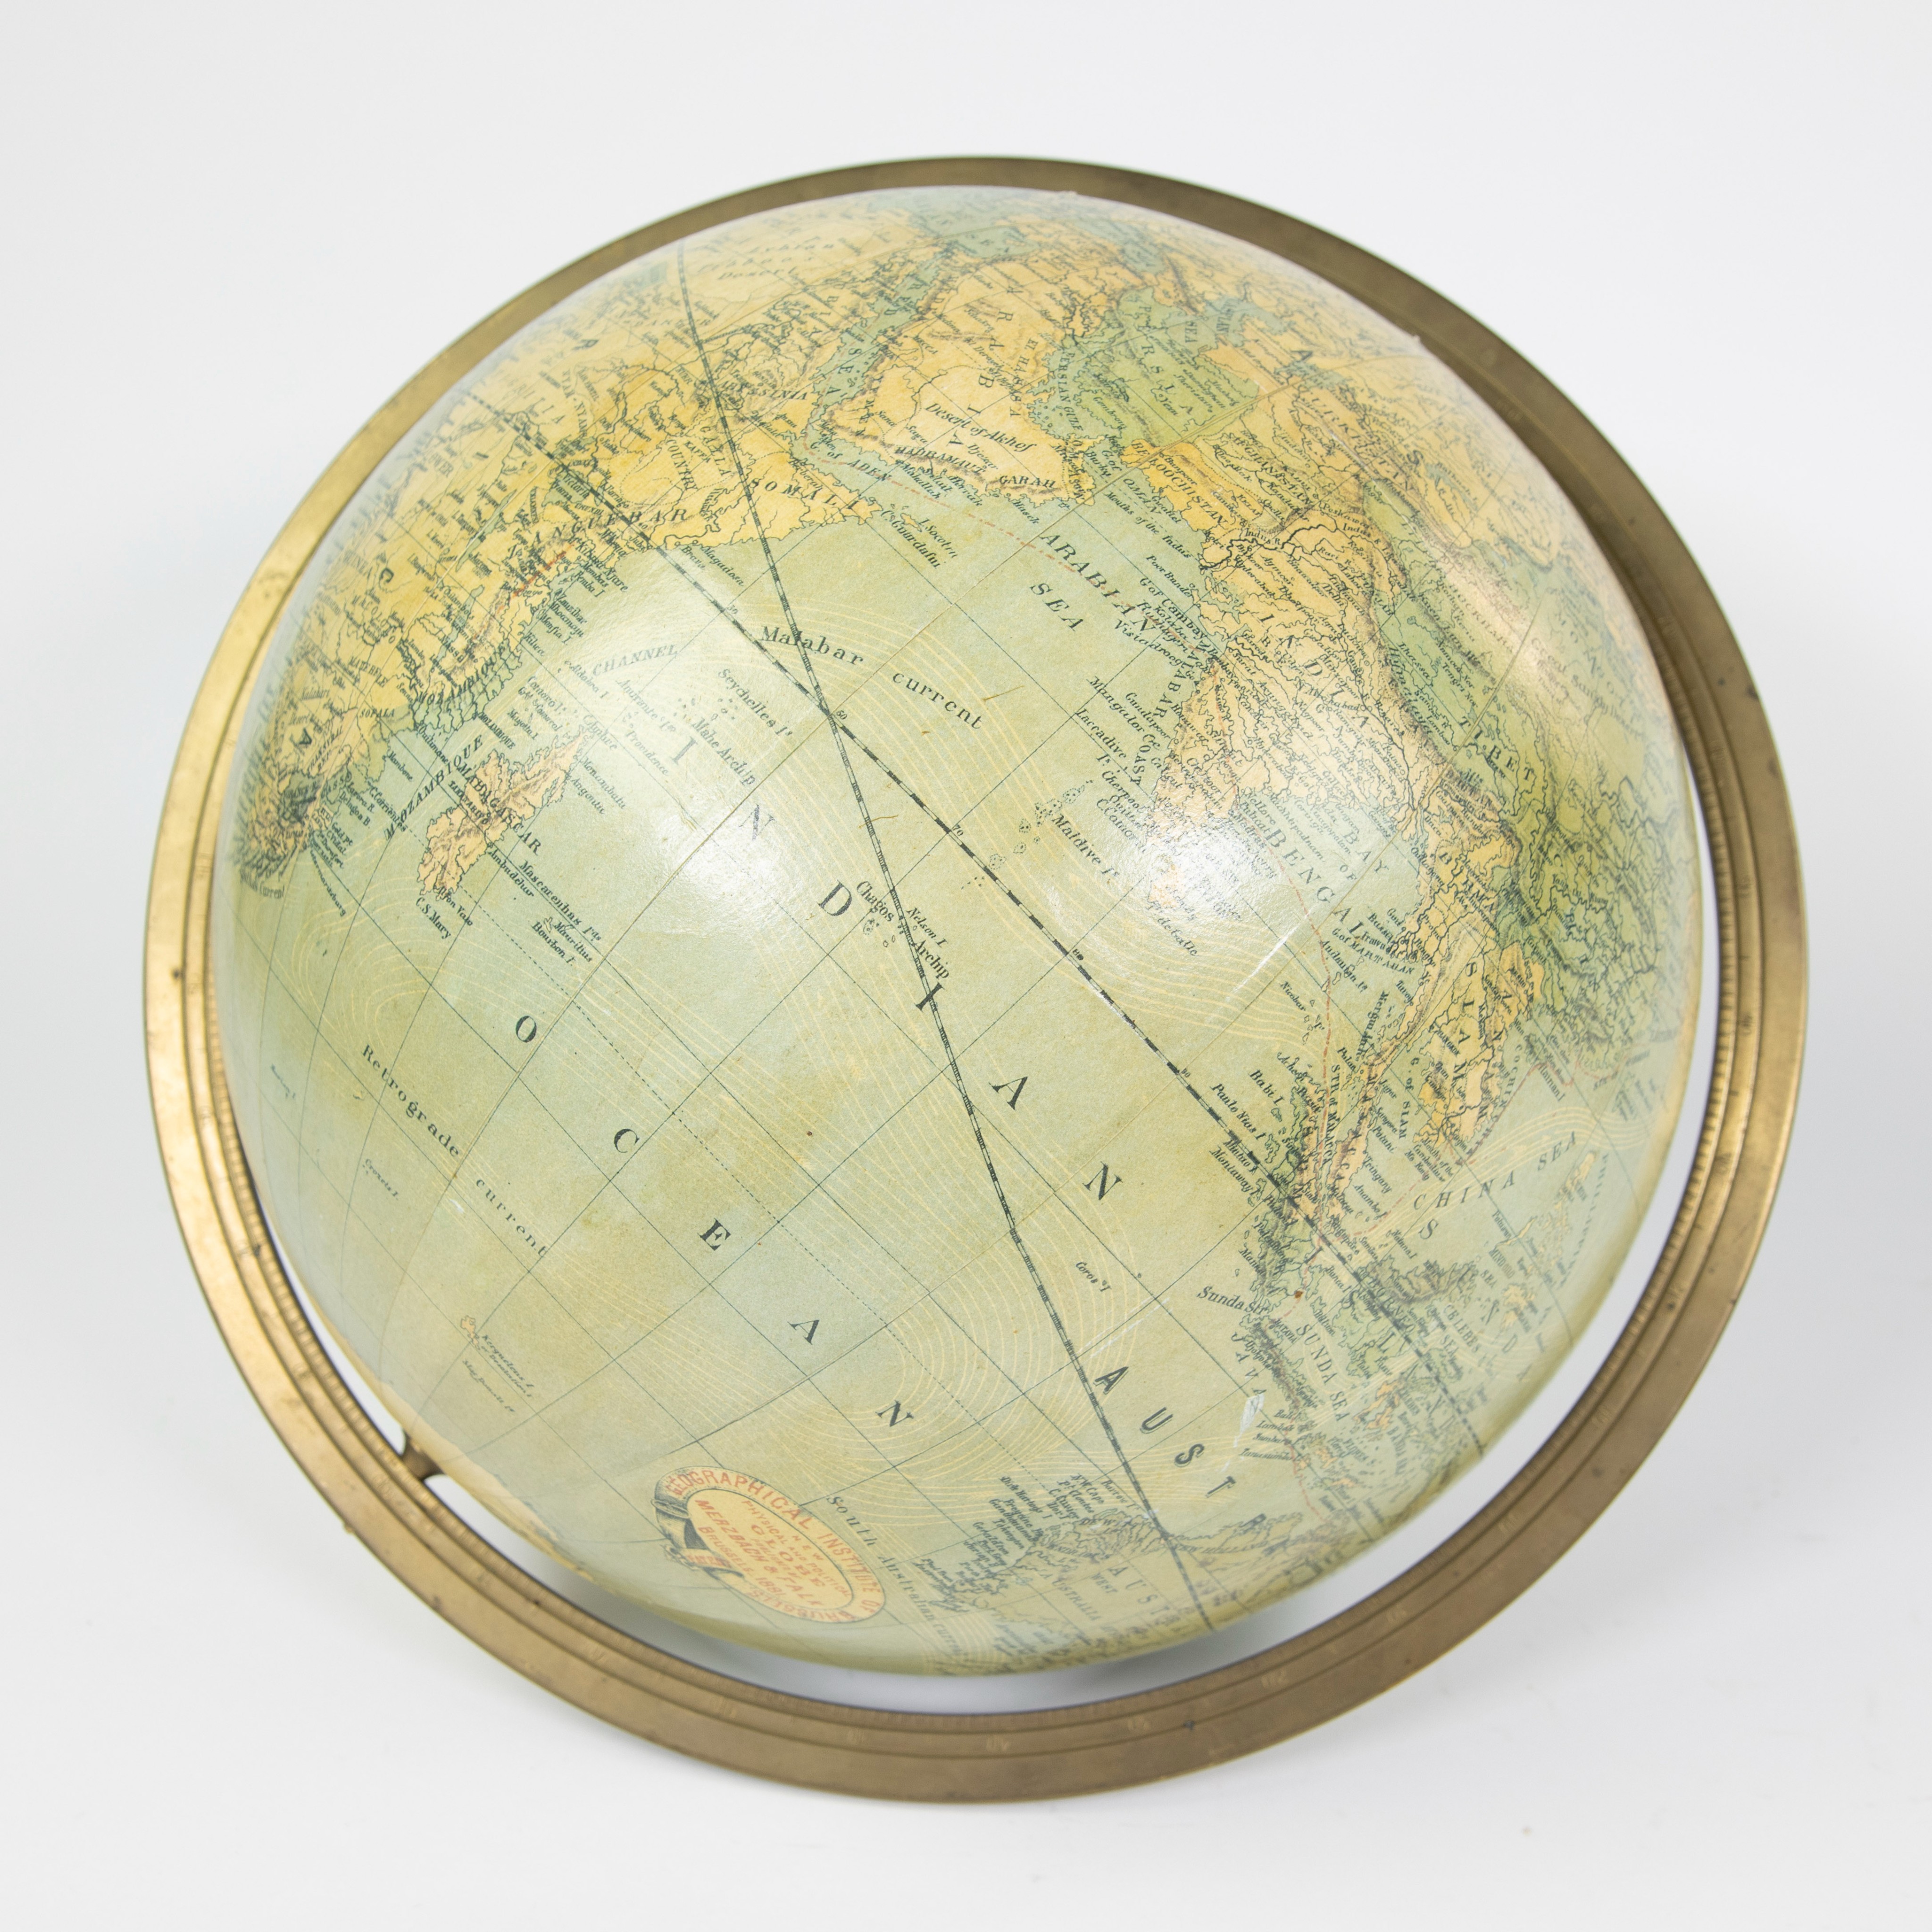 Vintage Merzbach and Falk physical and Political globe on stand, Geographical Institute of Brussels - Image 4 of 7